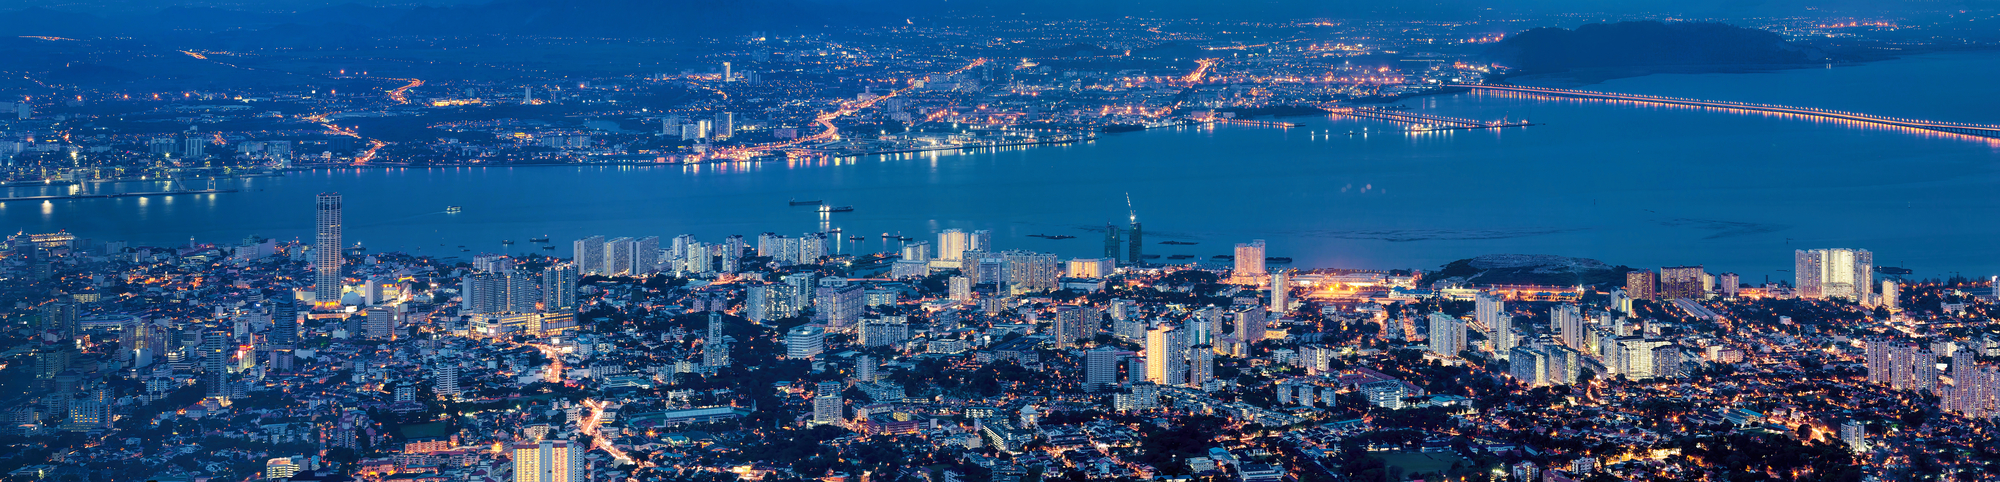 George Town Penang Malaysia Aerial Scenic view from Penang Hill during Evening Blue Hour Panorama